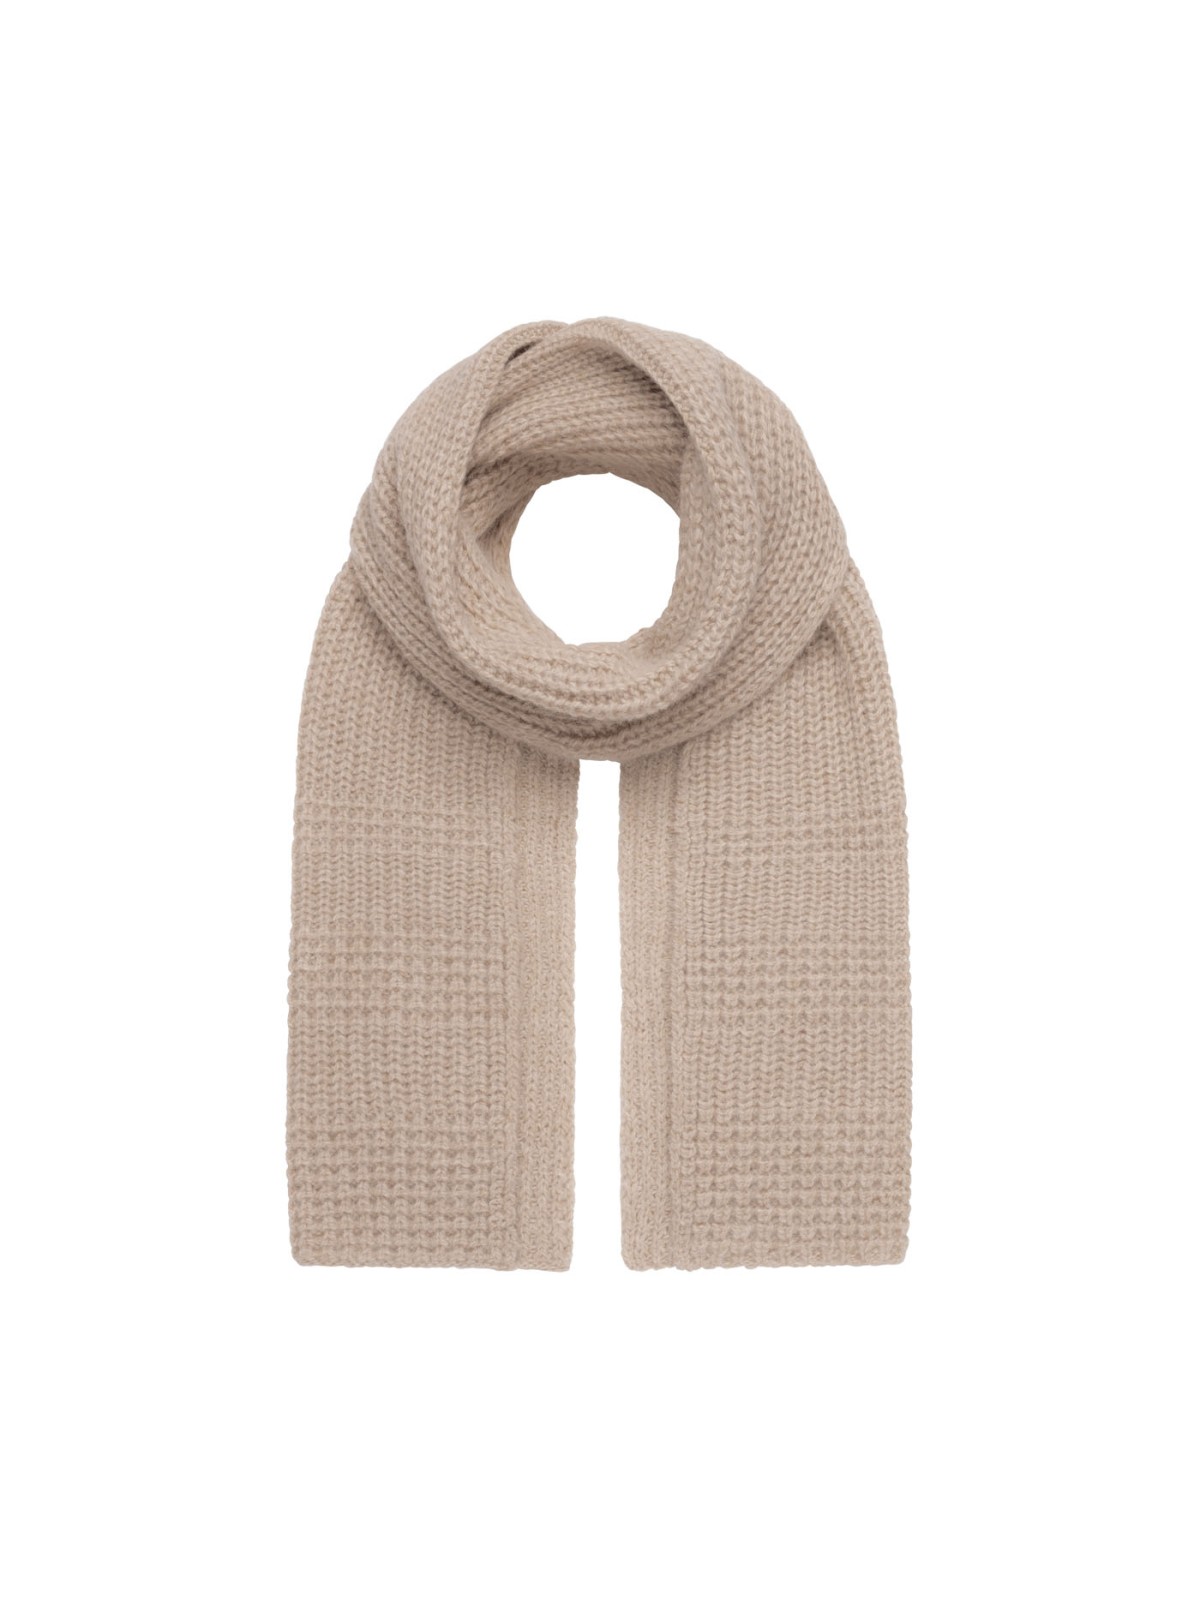 Scarf made from 100% alpaca wool - undyed